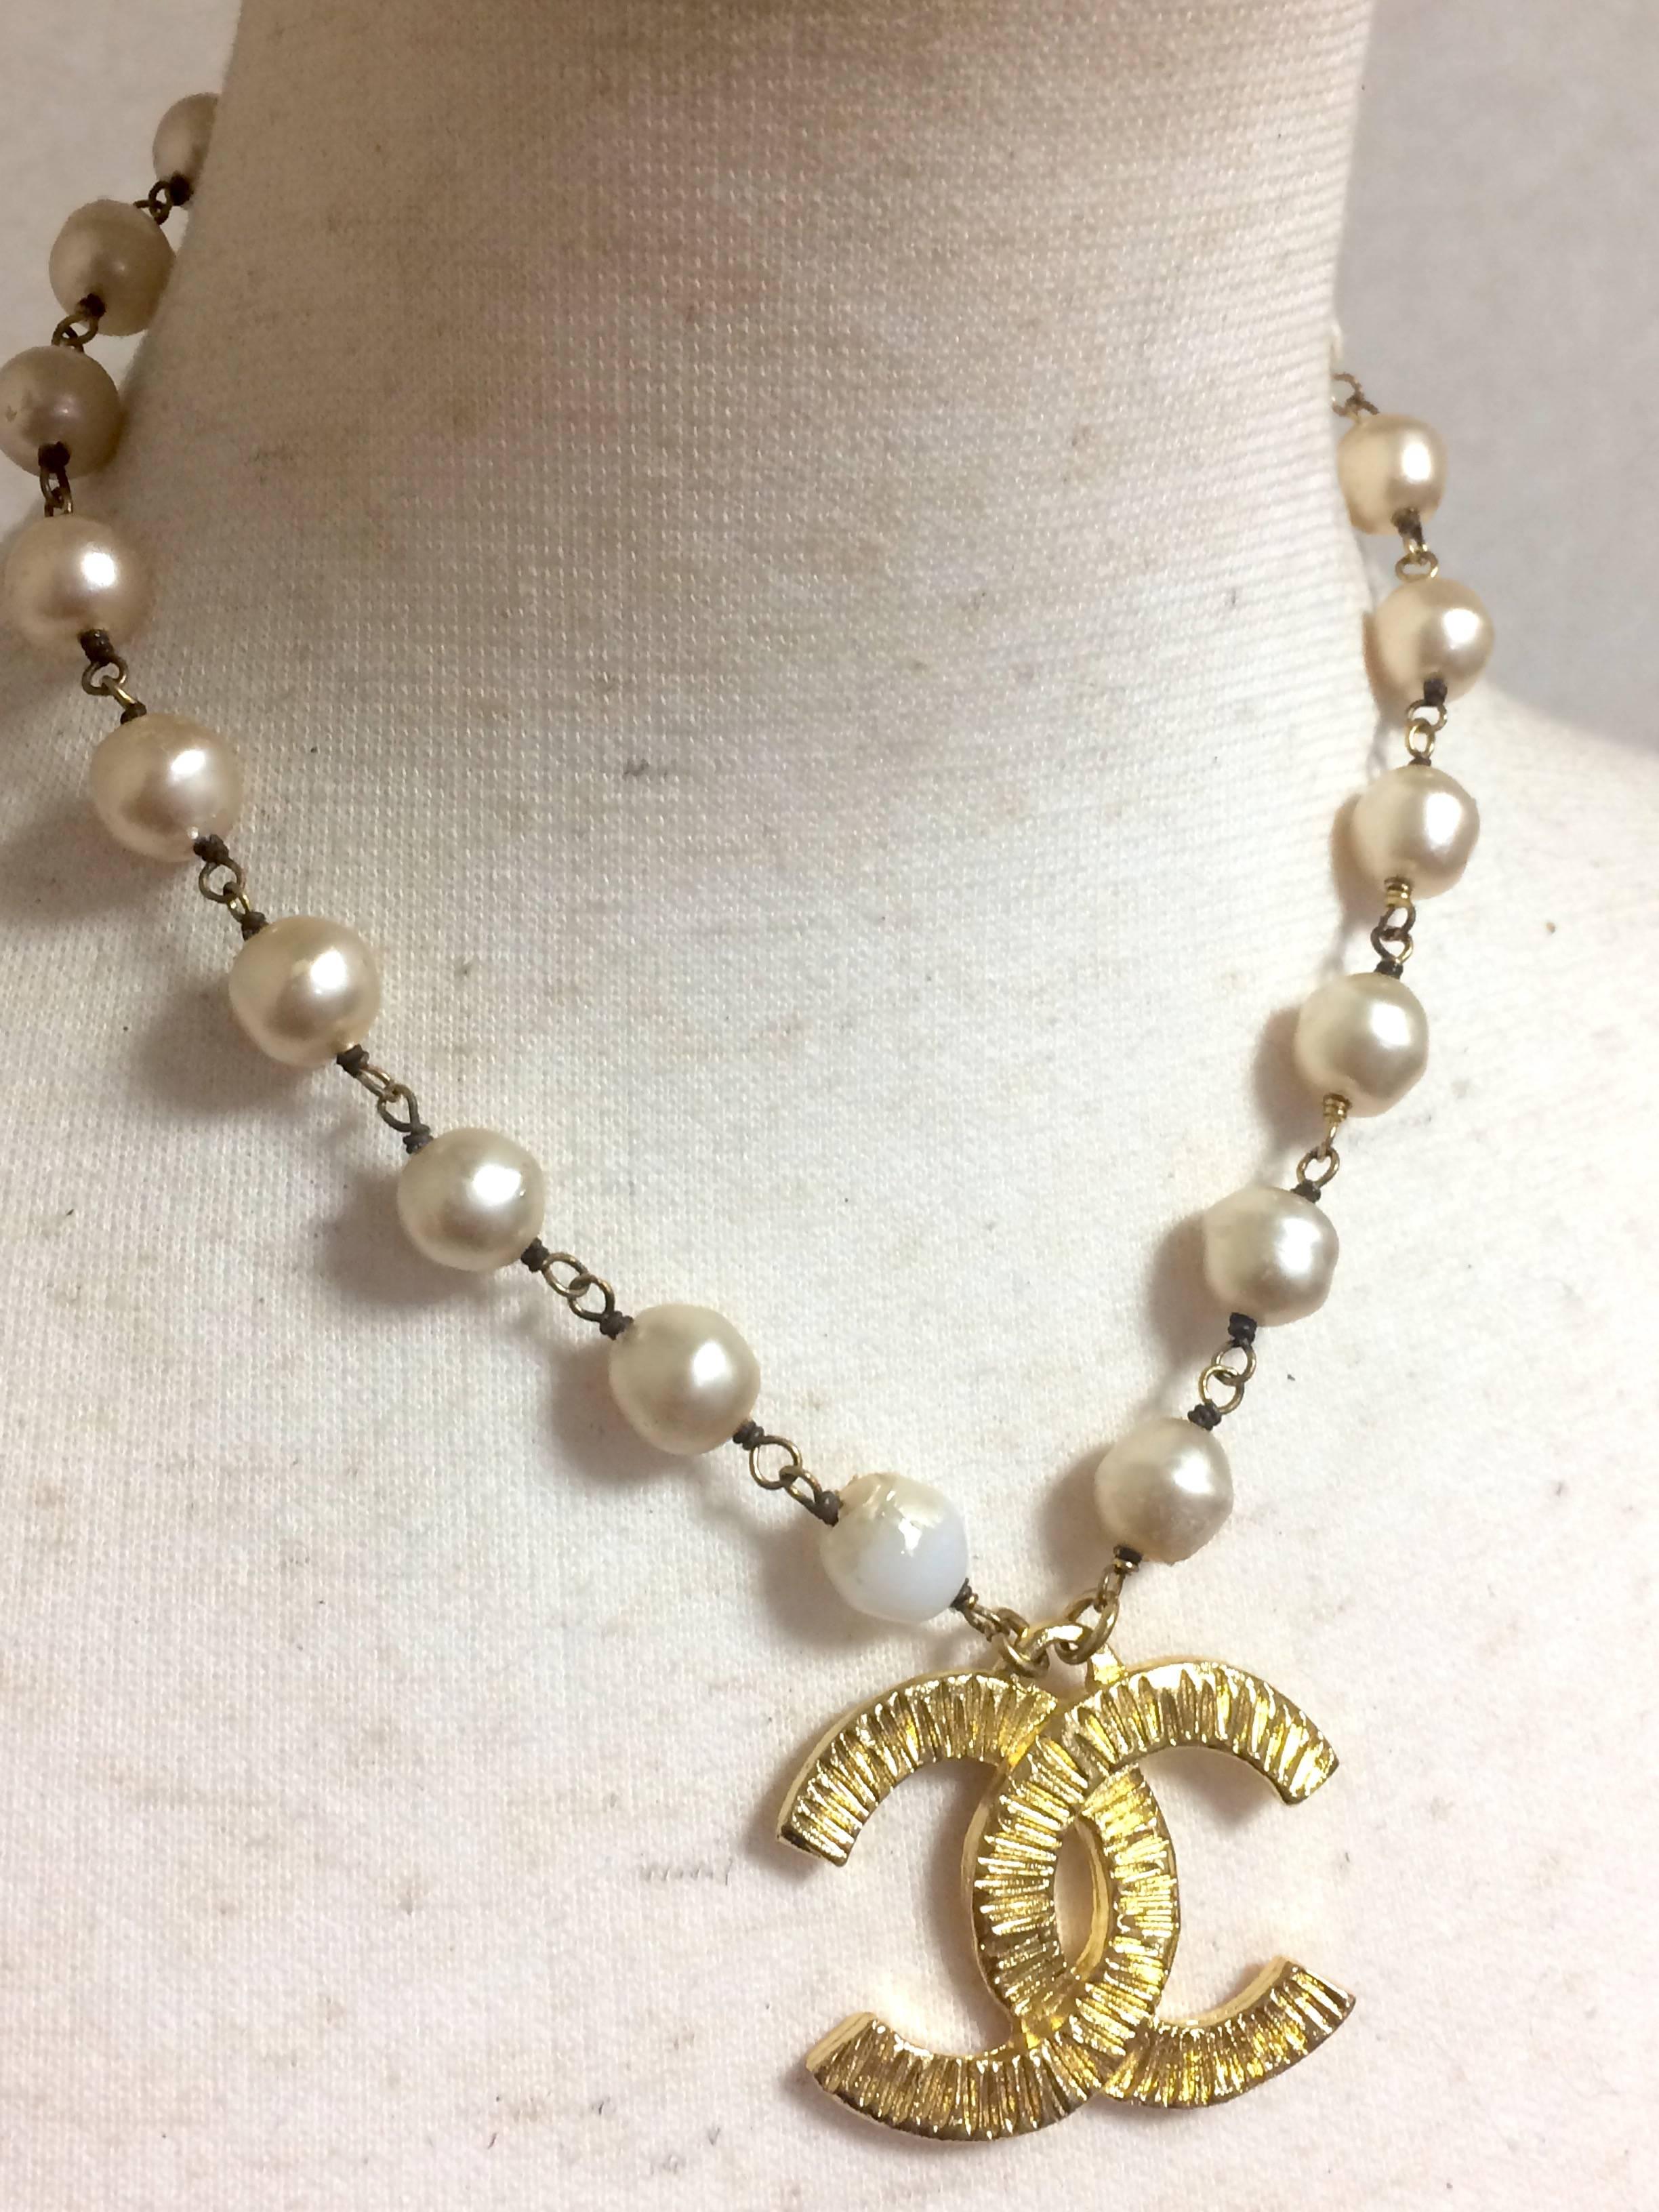 1980s. Vintage CHANEL white cream faux baroque pearl necklace with large CC mark pendant top. Classic design jewelry from 80's.

Introducing another classic design masterpiece jewelry from Chanel back in the 80's...Great as a gift. Free gift